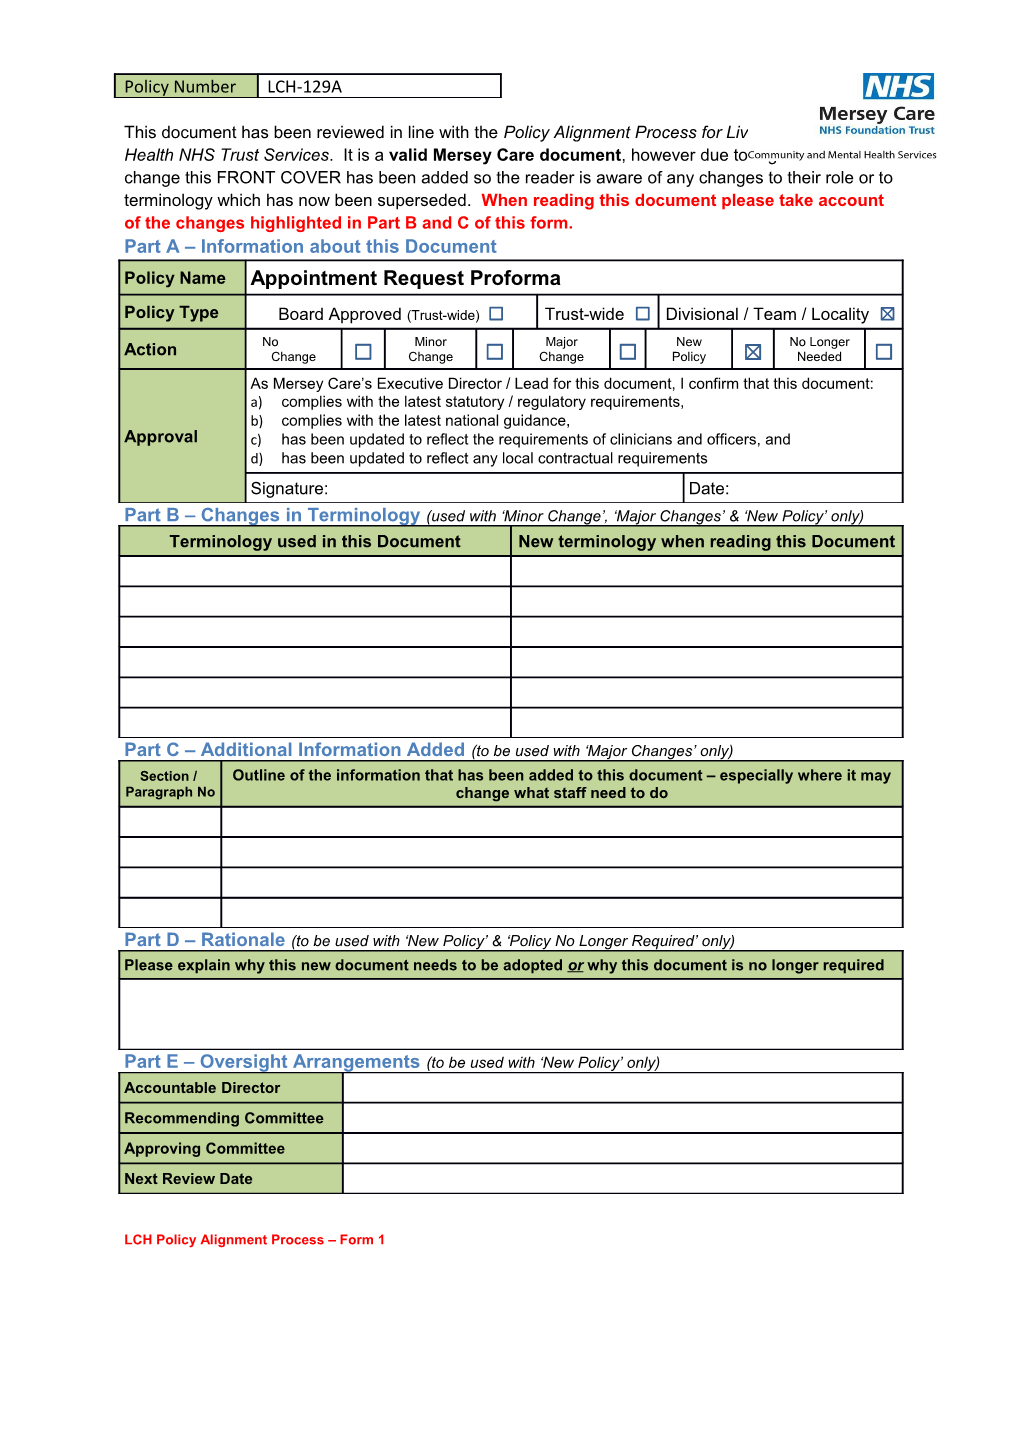 Policy 129A Appointment Request Proforma